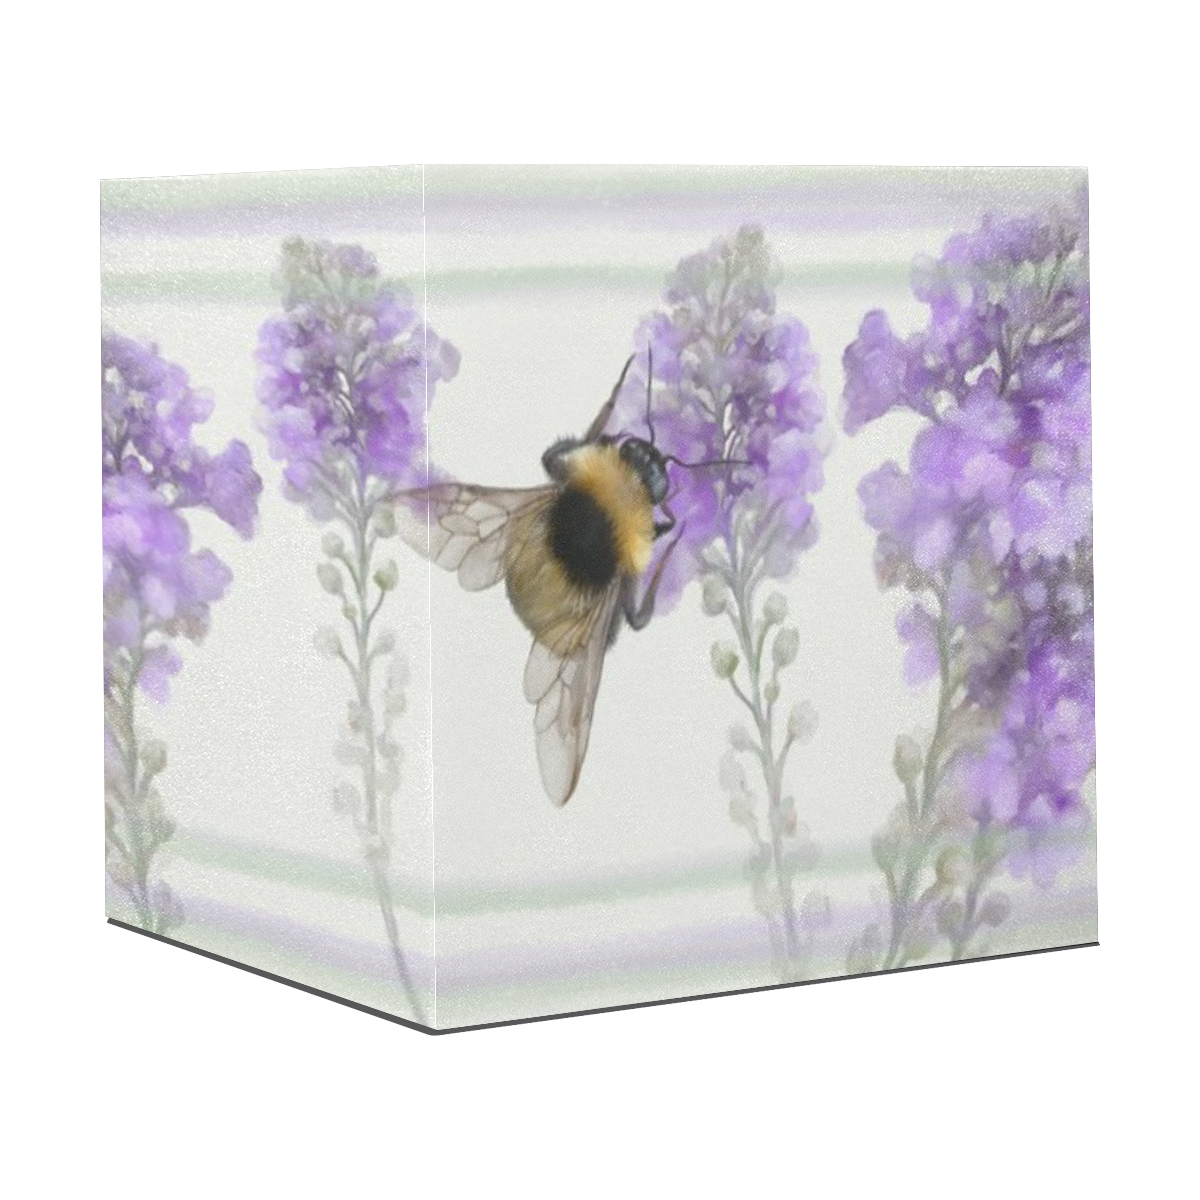 Bumblebee, purple, violet floral watercolor Gift Wrapping Paper 58"x 23" (5 Rolls)